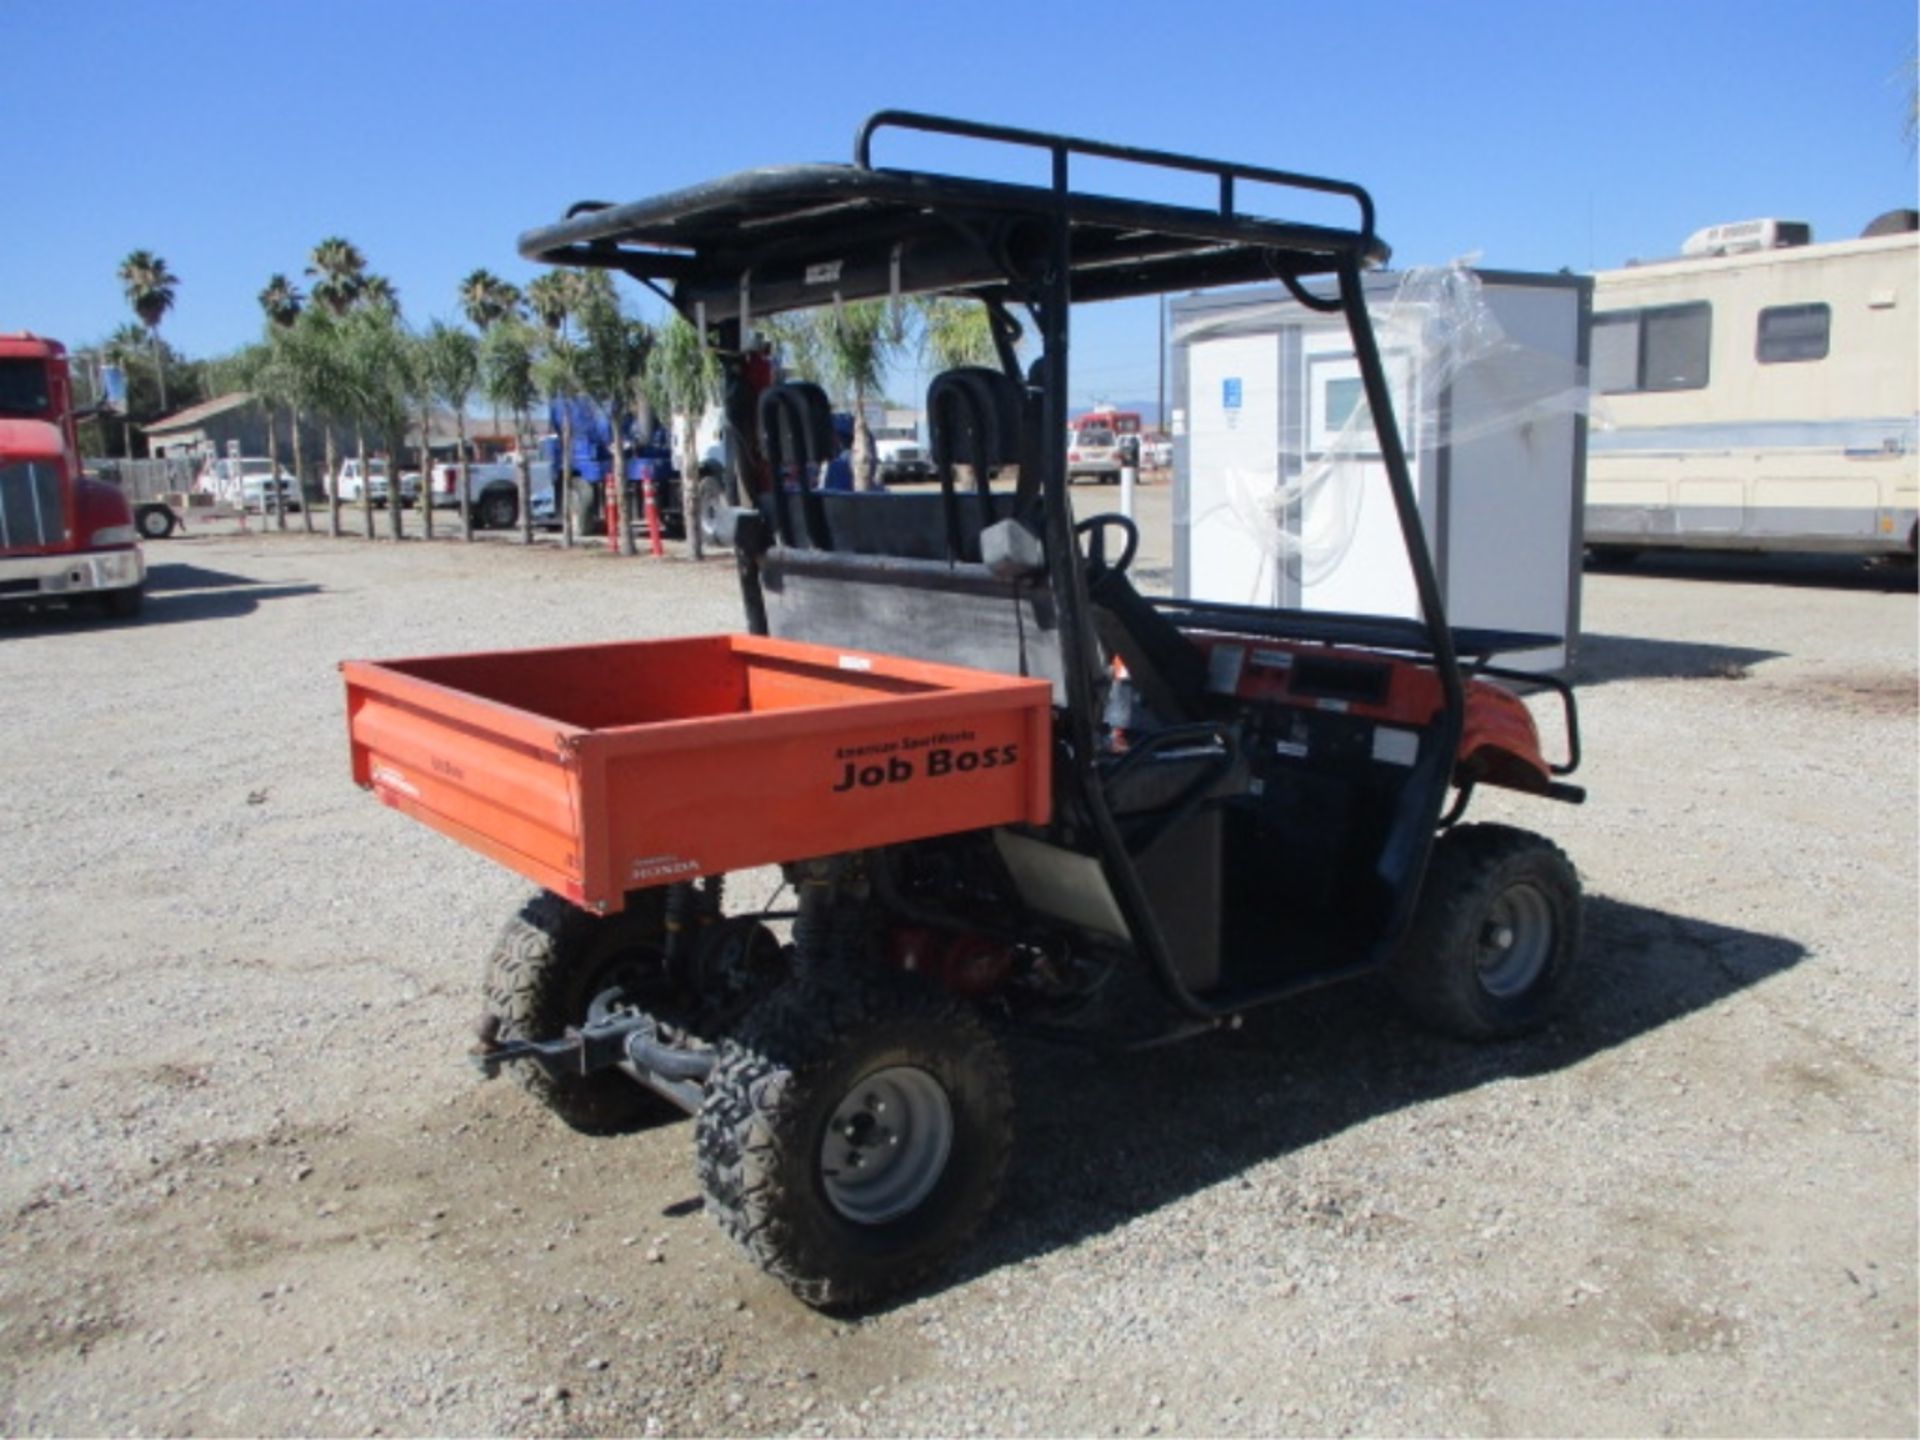 2008 American Sportworks Job Boss Utility Cart, Honda Gas, Rear Metal Dump Bed, Canopy, Tow Hitch, - Image 15 of 50